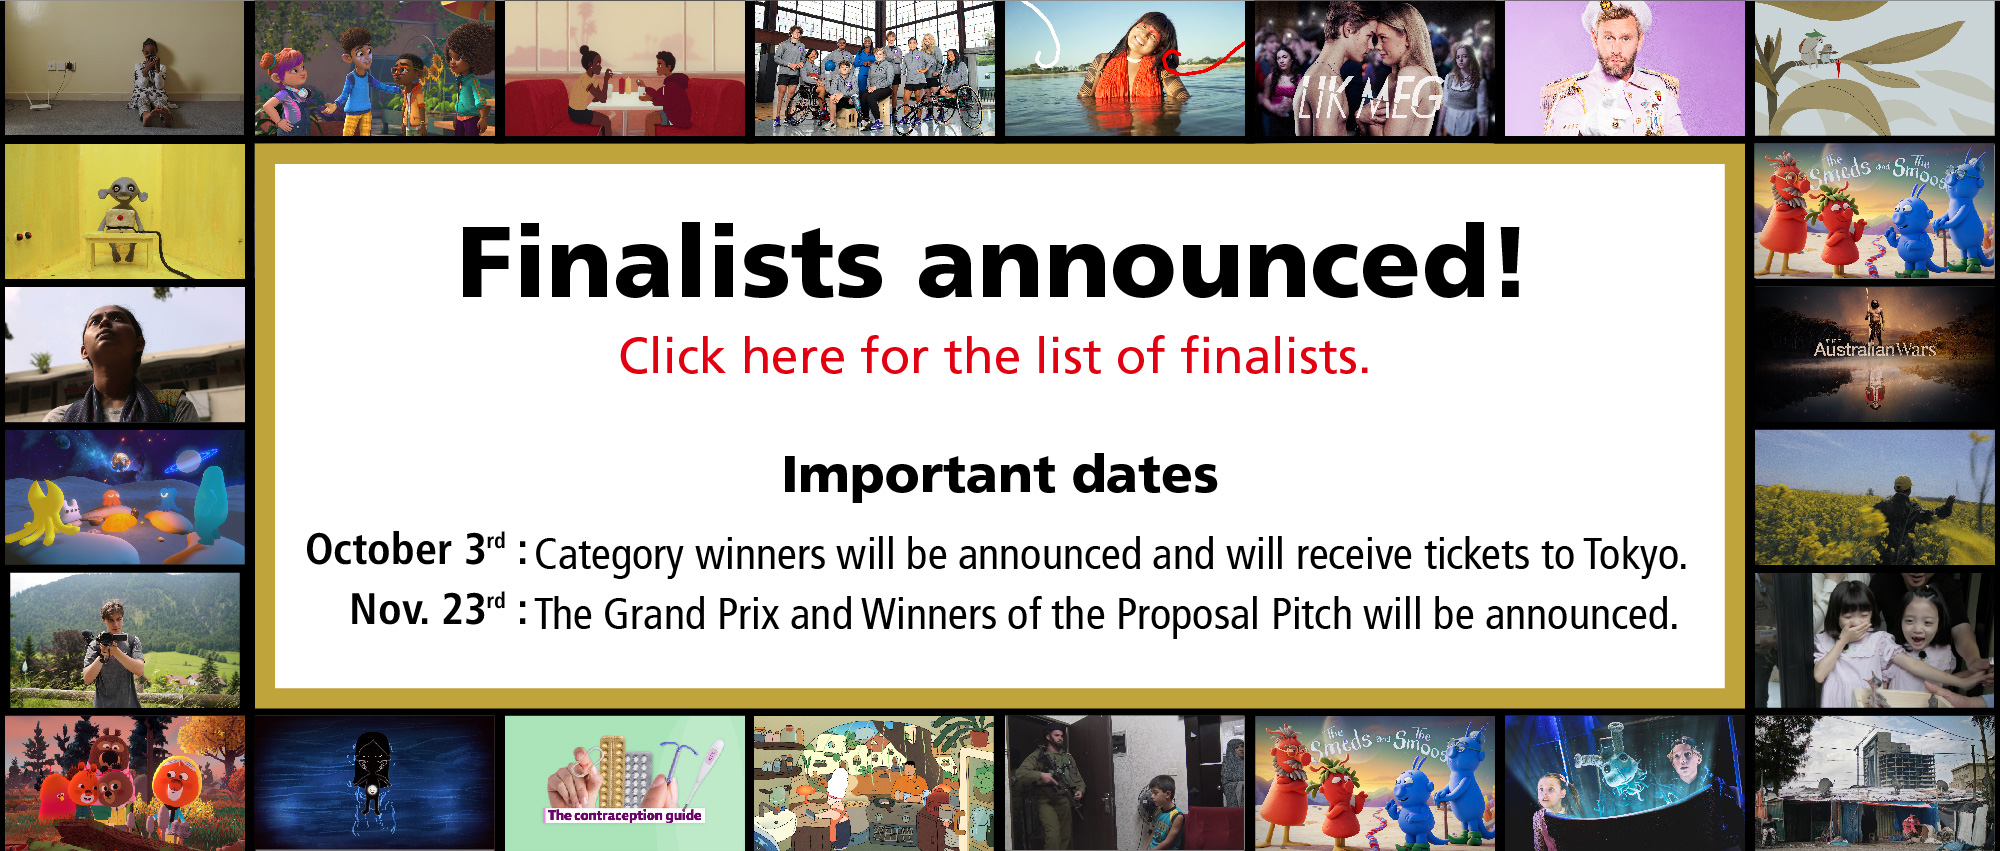 Finalists announced! Click here for the list of finalists.